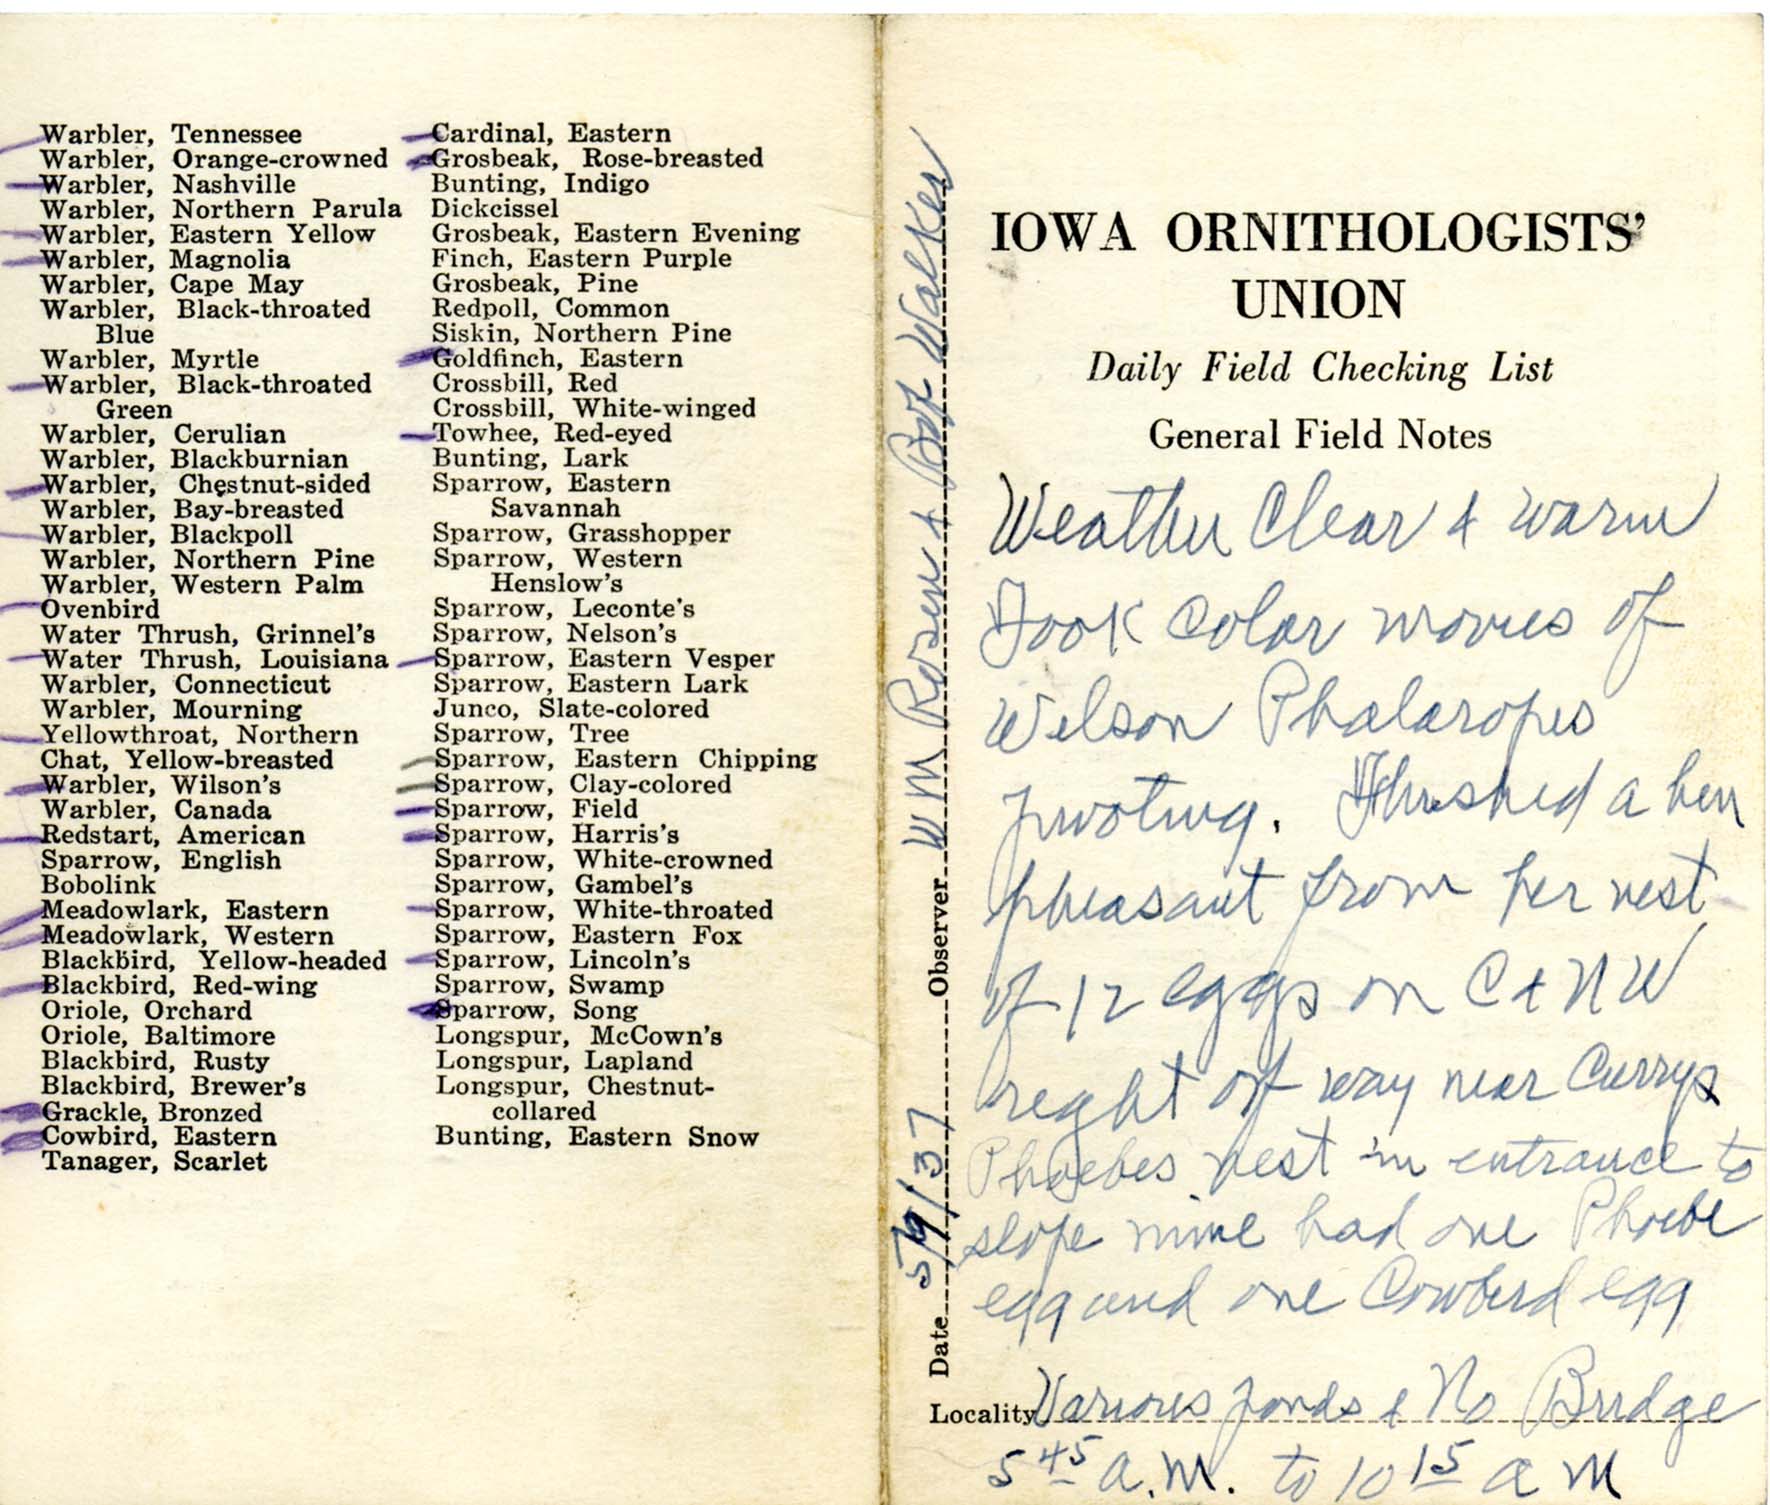 Daily field checking list by Walter Rosene, May 9, 1937